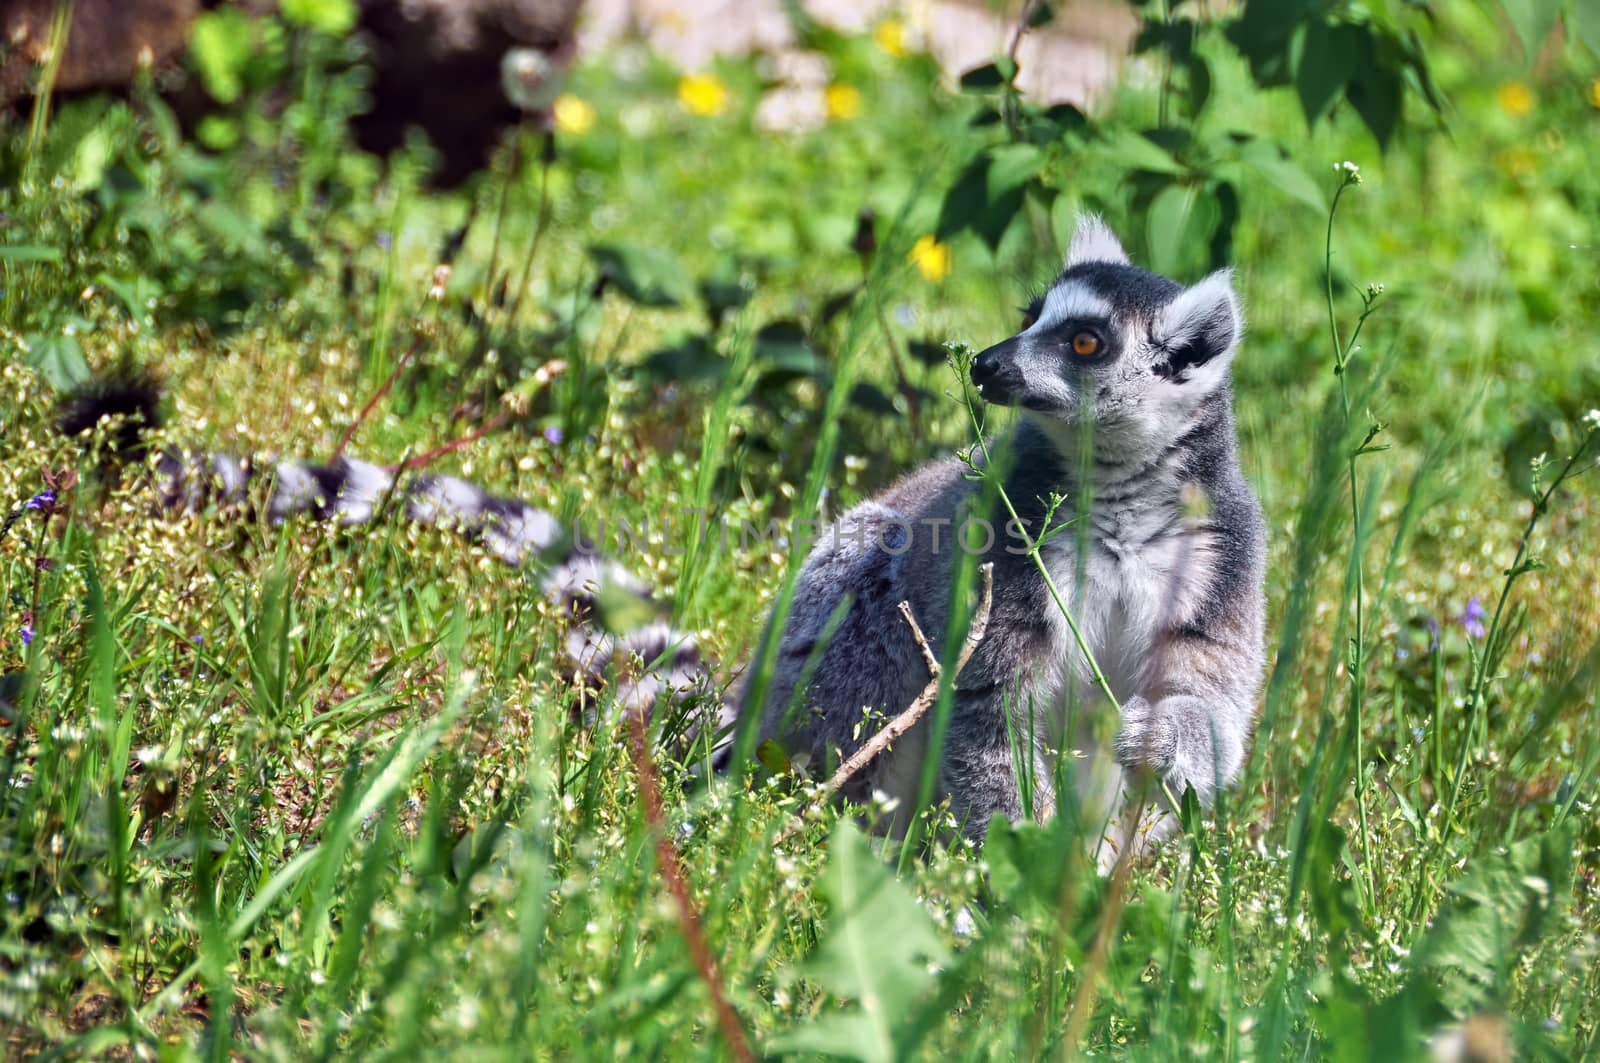 Lemur with beautiful striped tail smelling flower by infinityyy